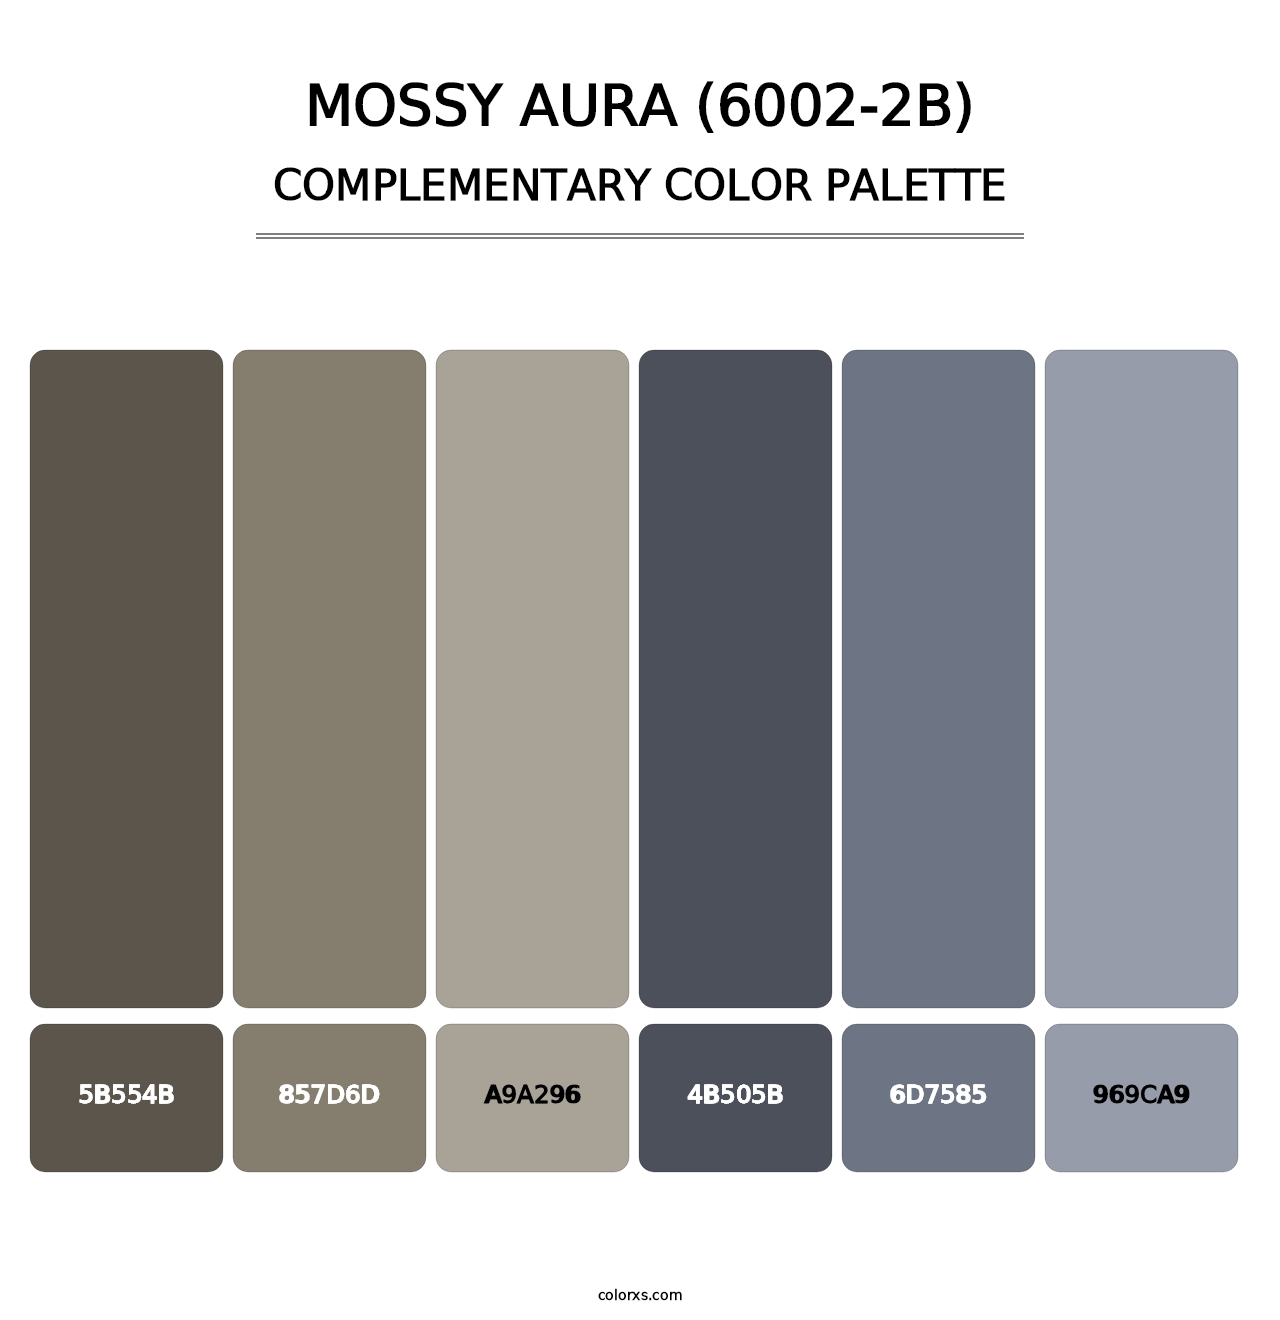 Mossy Aura (6002-2B) - Complementary Color Palette